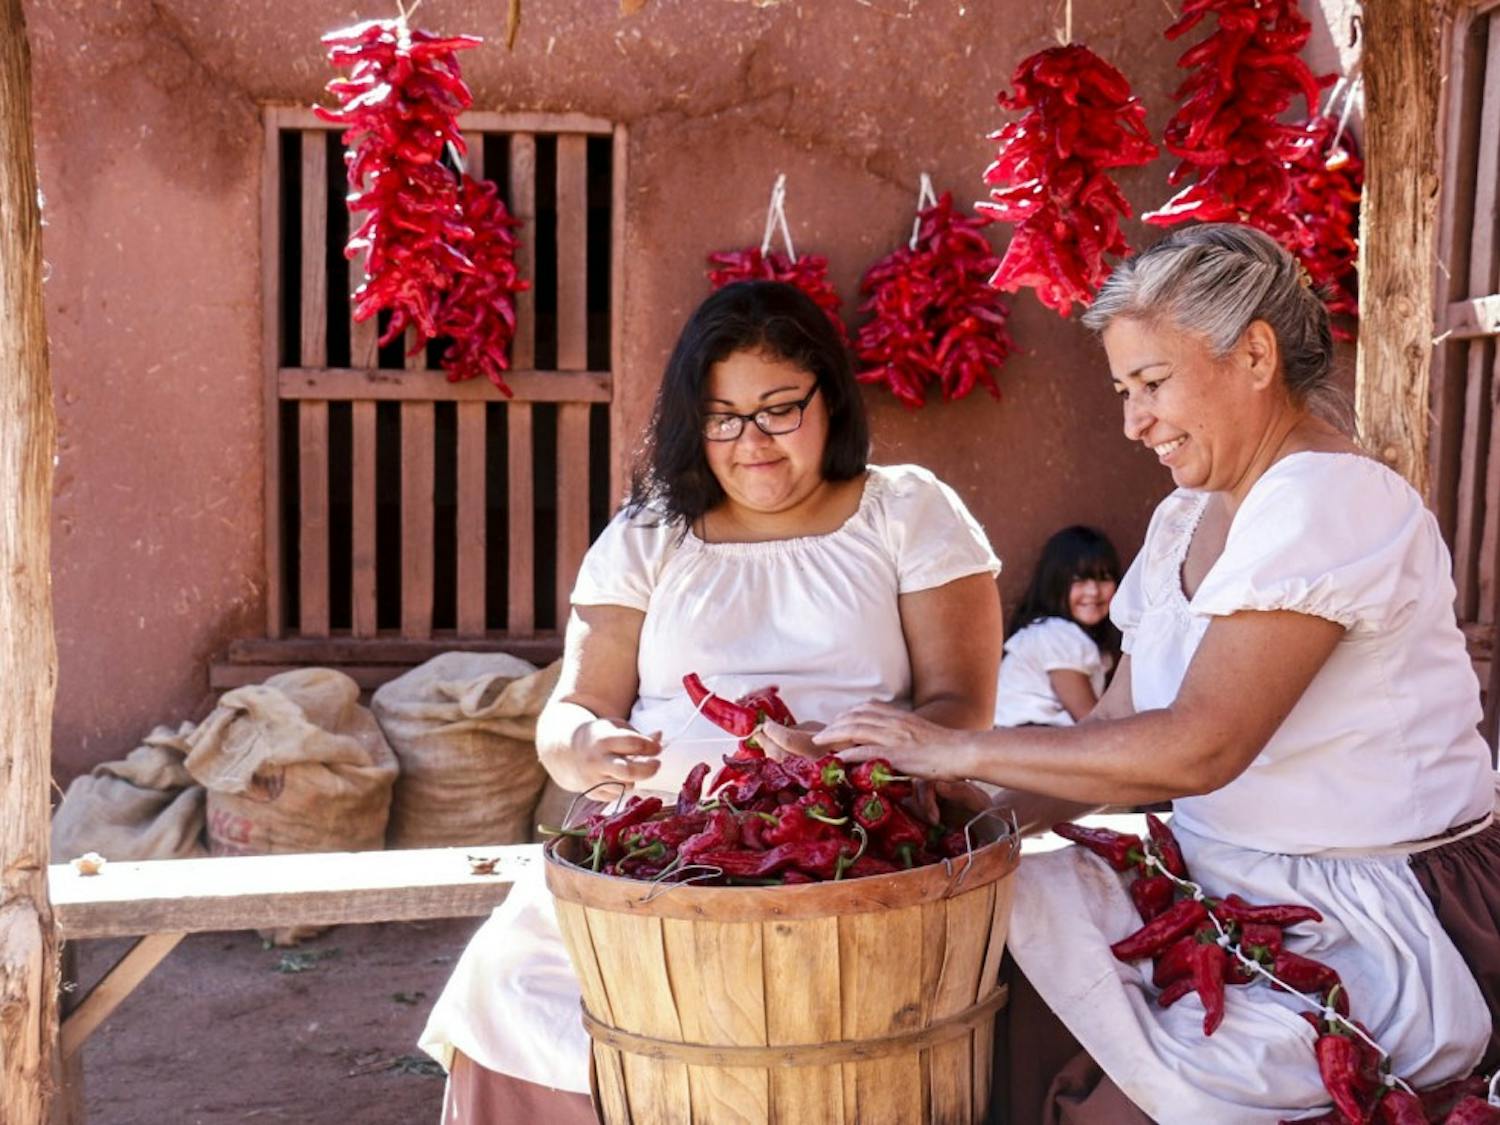 Chile ristra crafters show visitors how to create them at this year?s 45th Annual Harvest Festival at El Rancho de Las Golondrinas on Oct. 1, 2017. Las Golondrinas had ?villages? set throughout the ranch to demonstrate life during the 18th and 19th centuries.